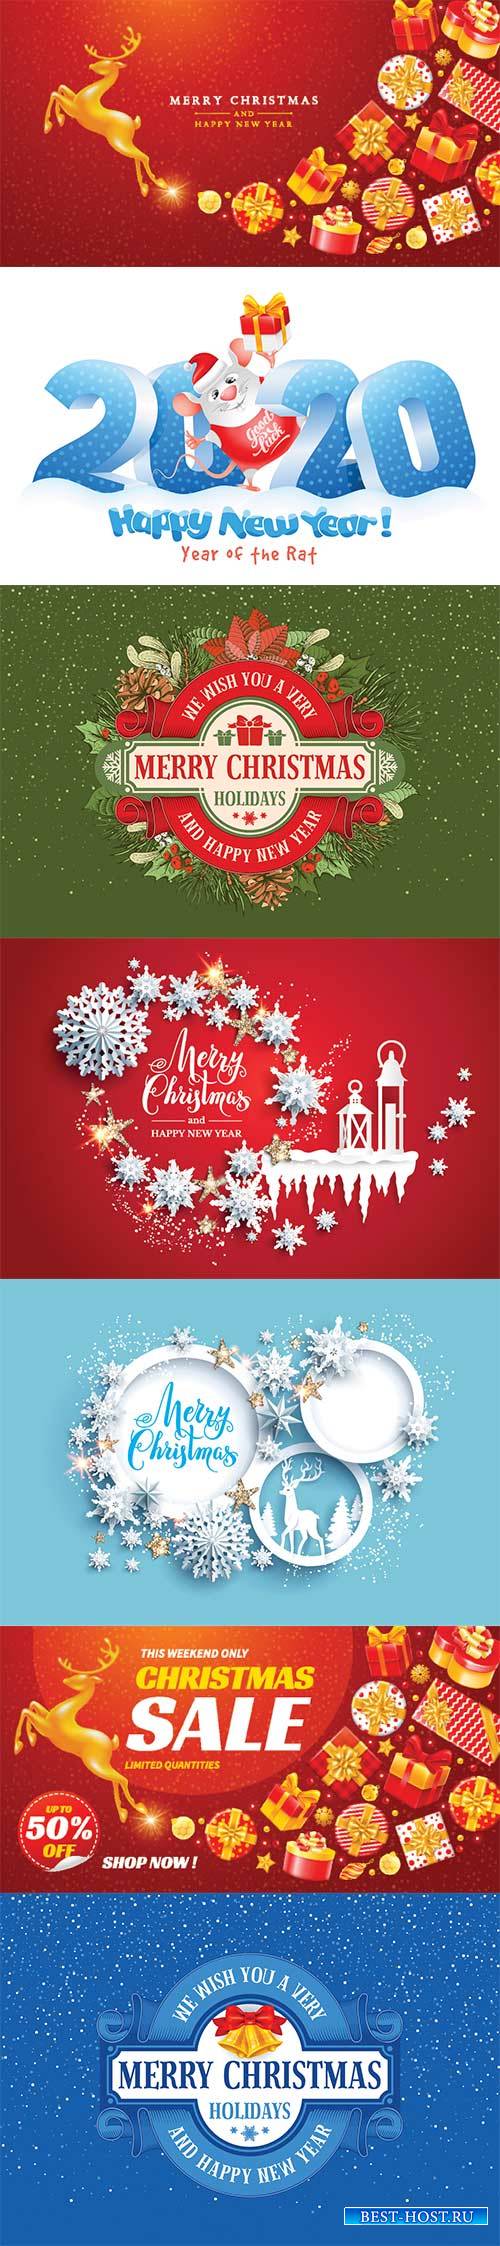 2020 Happy New Year and Christmas vector illustration